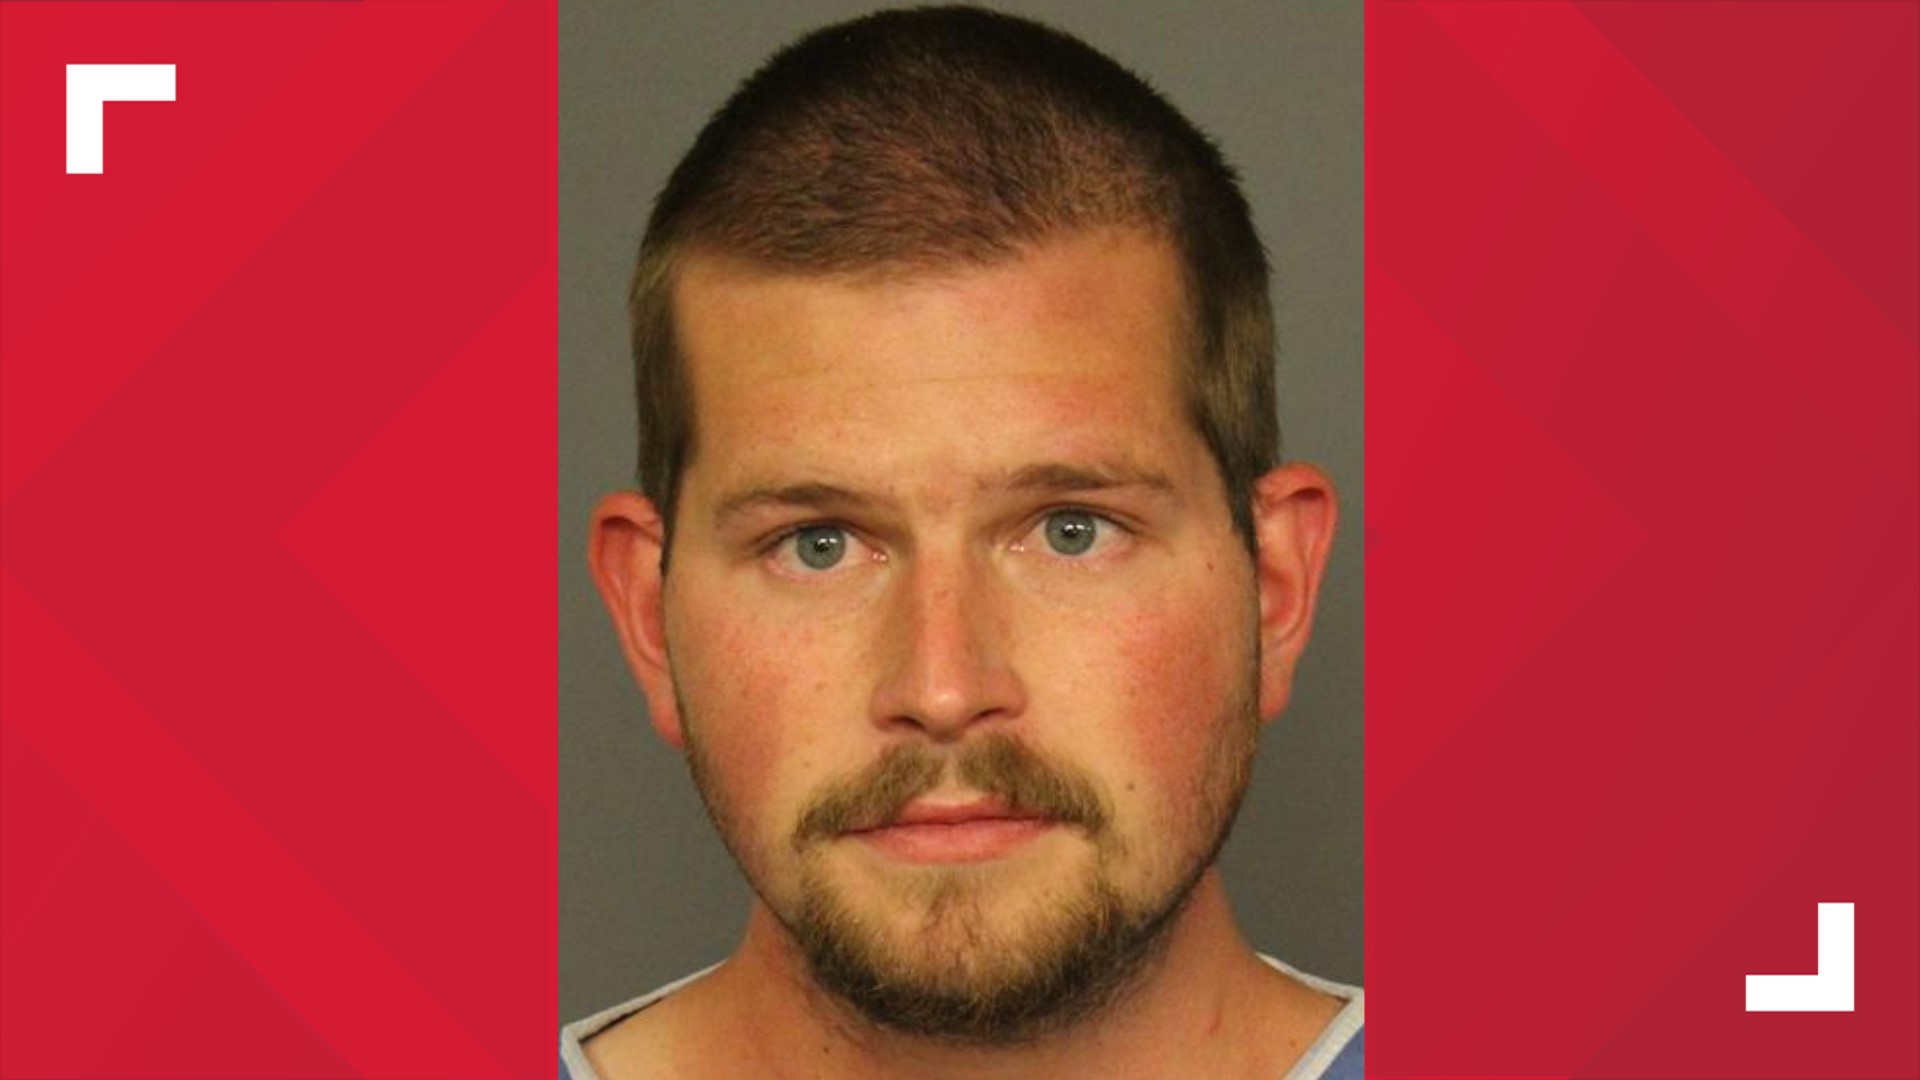 Jared Bates pleaded guilty to sexually assaulting a woman who was unconscious, police said.